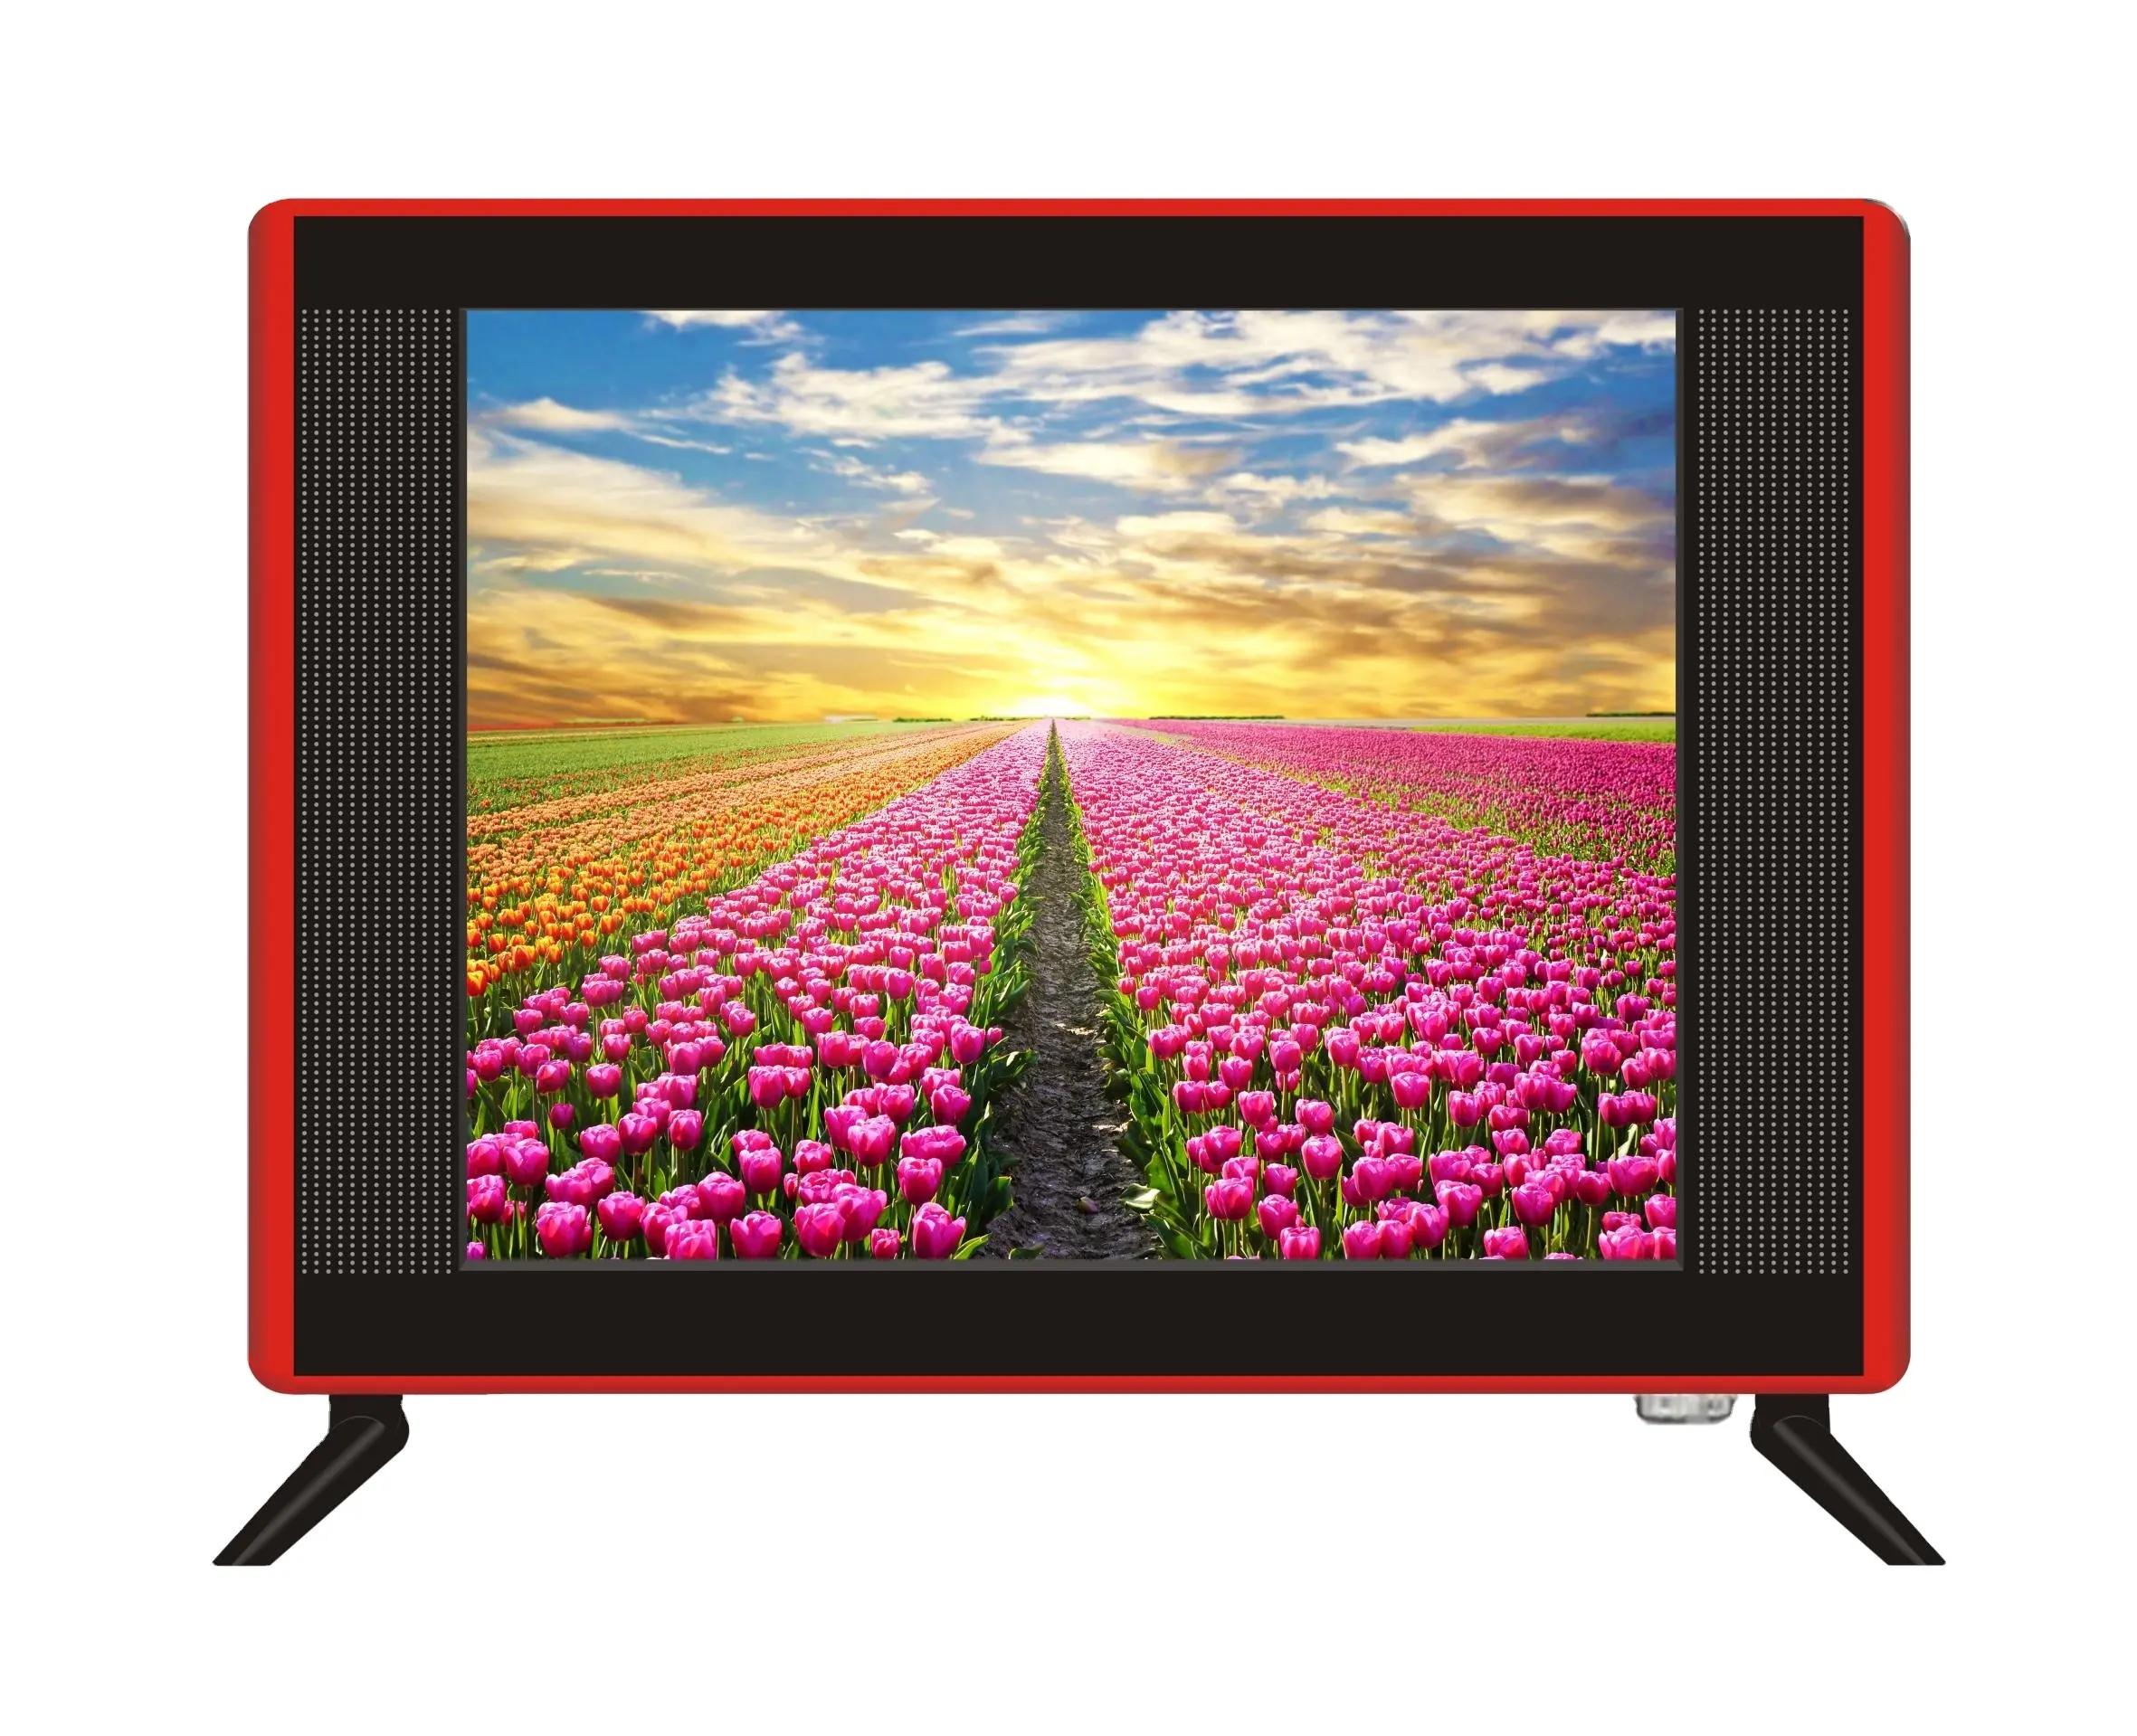 17 Inch Led TV Home TV LCD Wholesale in Africa Quality Guaranteed KS-LC-17A1 10" - 19" Black Color Pal(50hz) A+